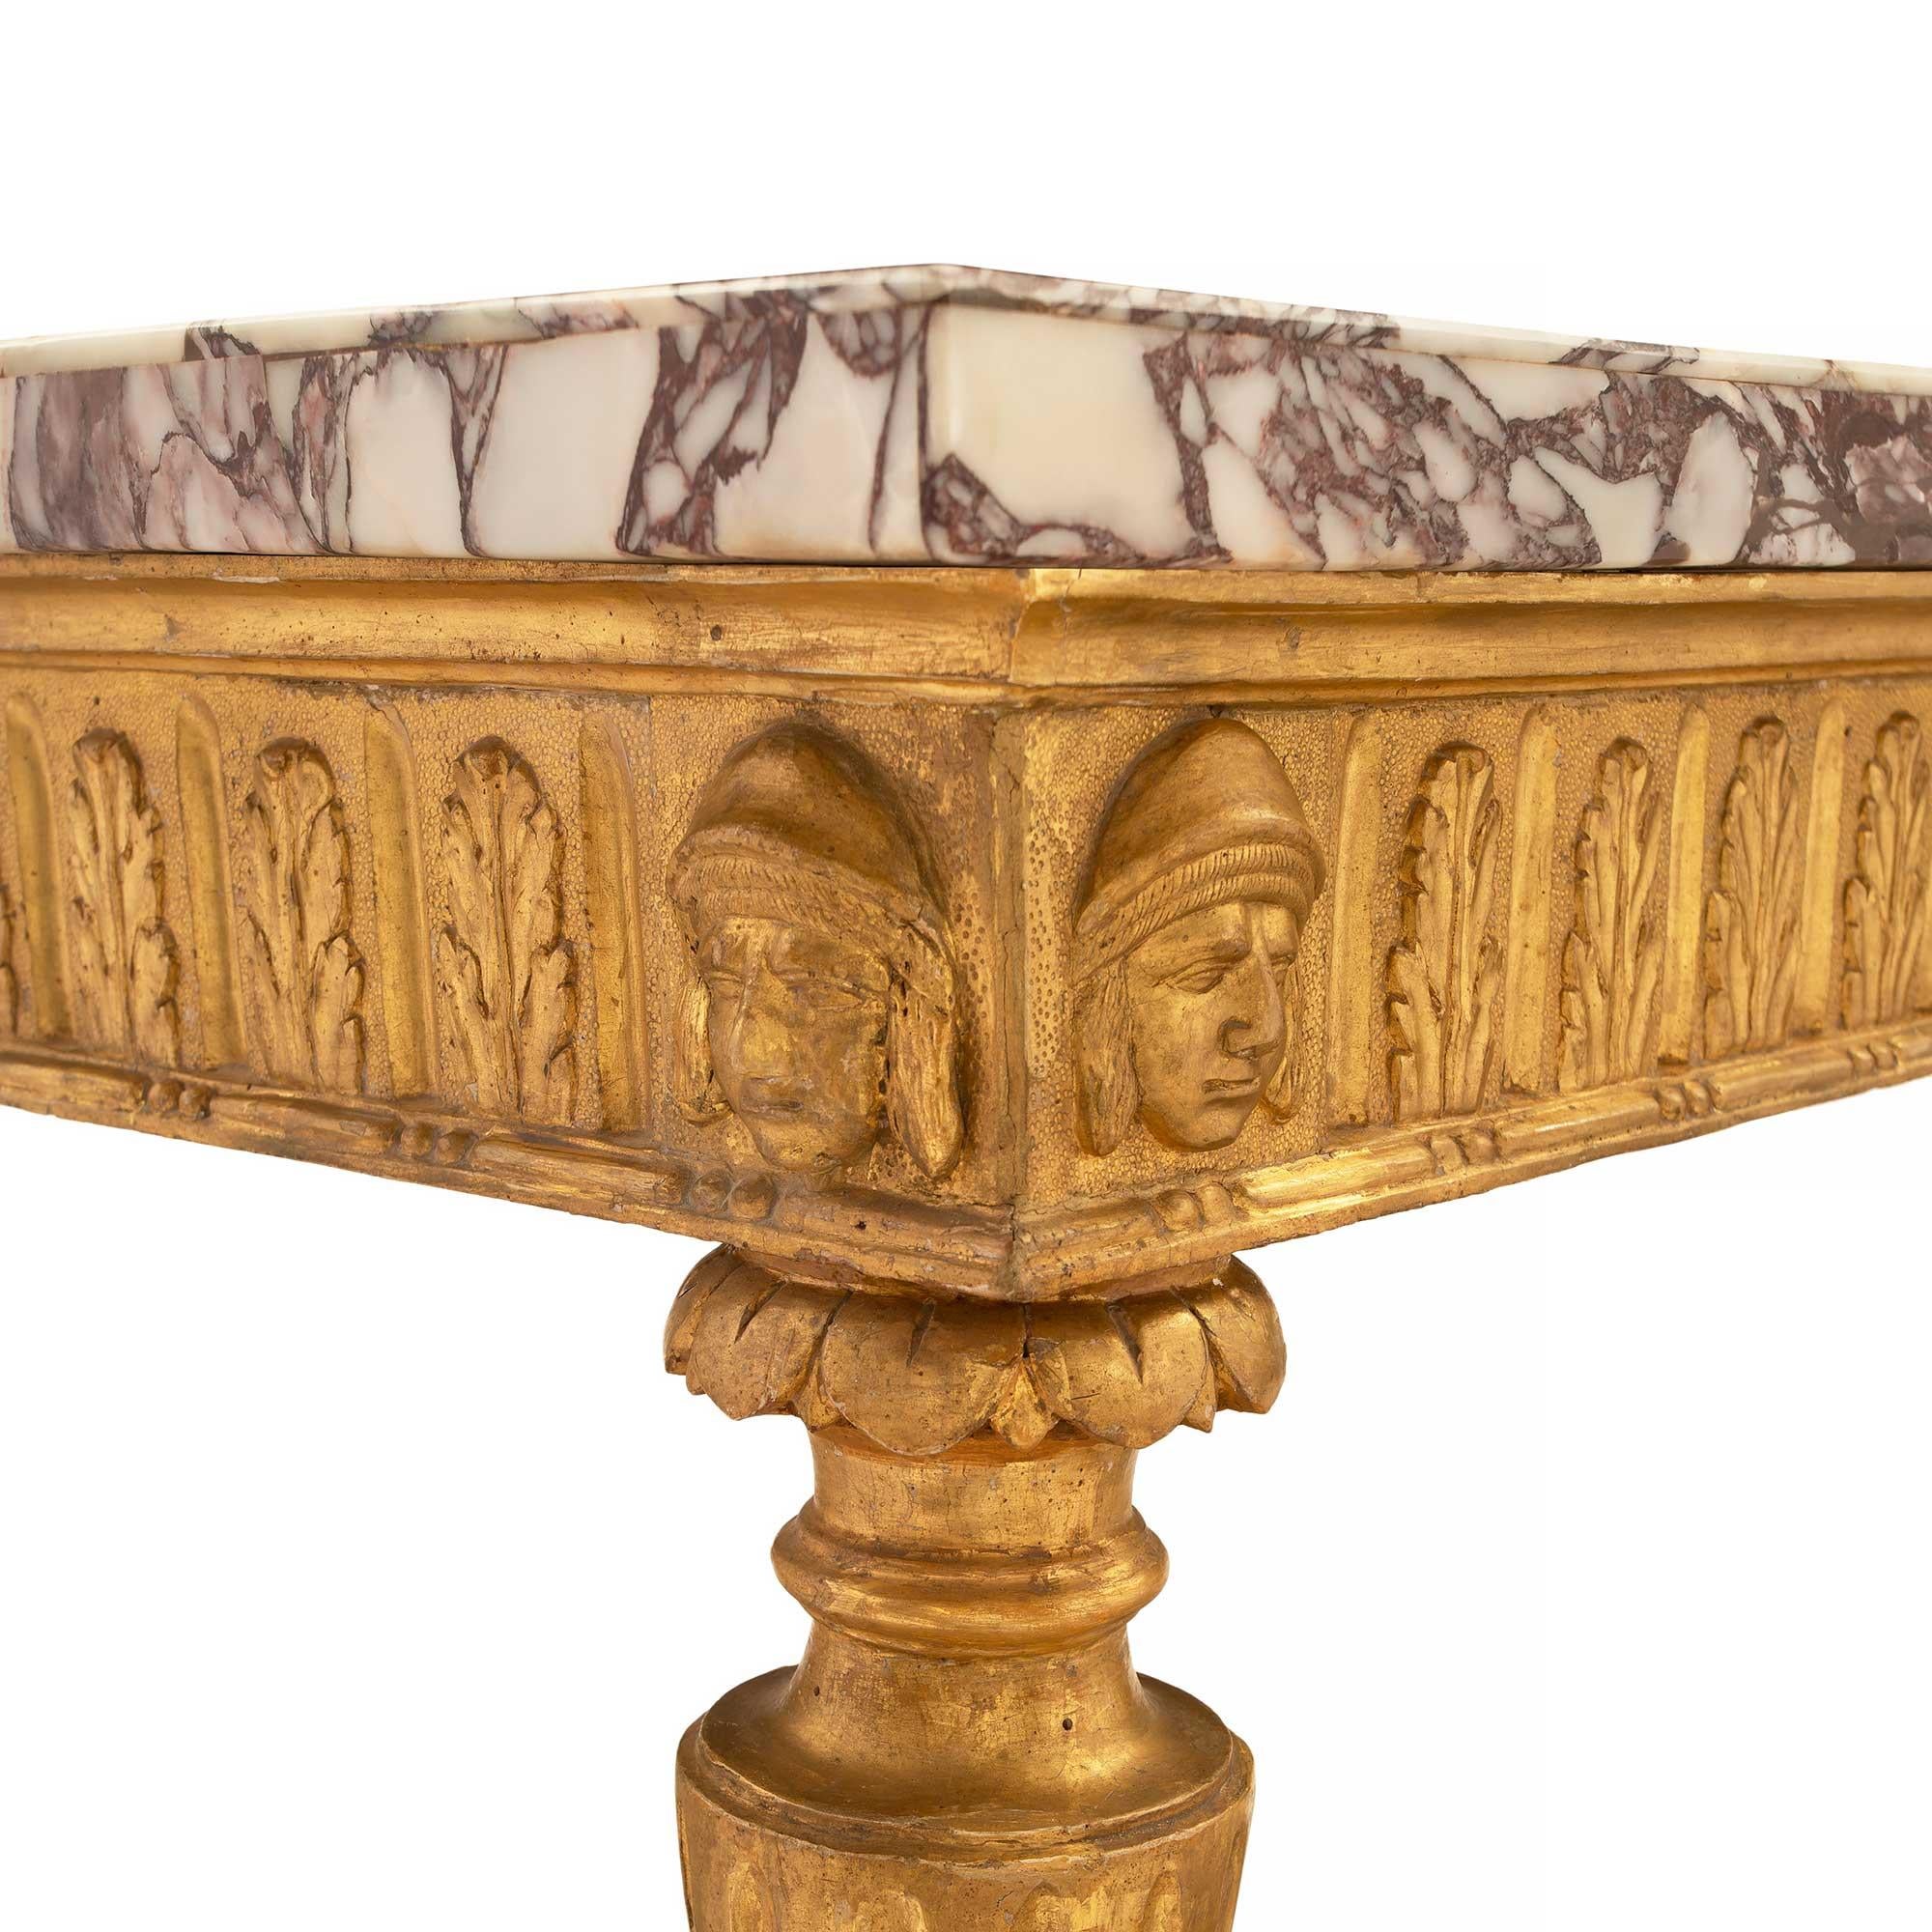 Italian 18th Century Louis XVI Period Giltwood Freestanding Console Table For Sale 1